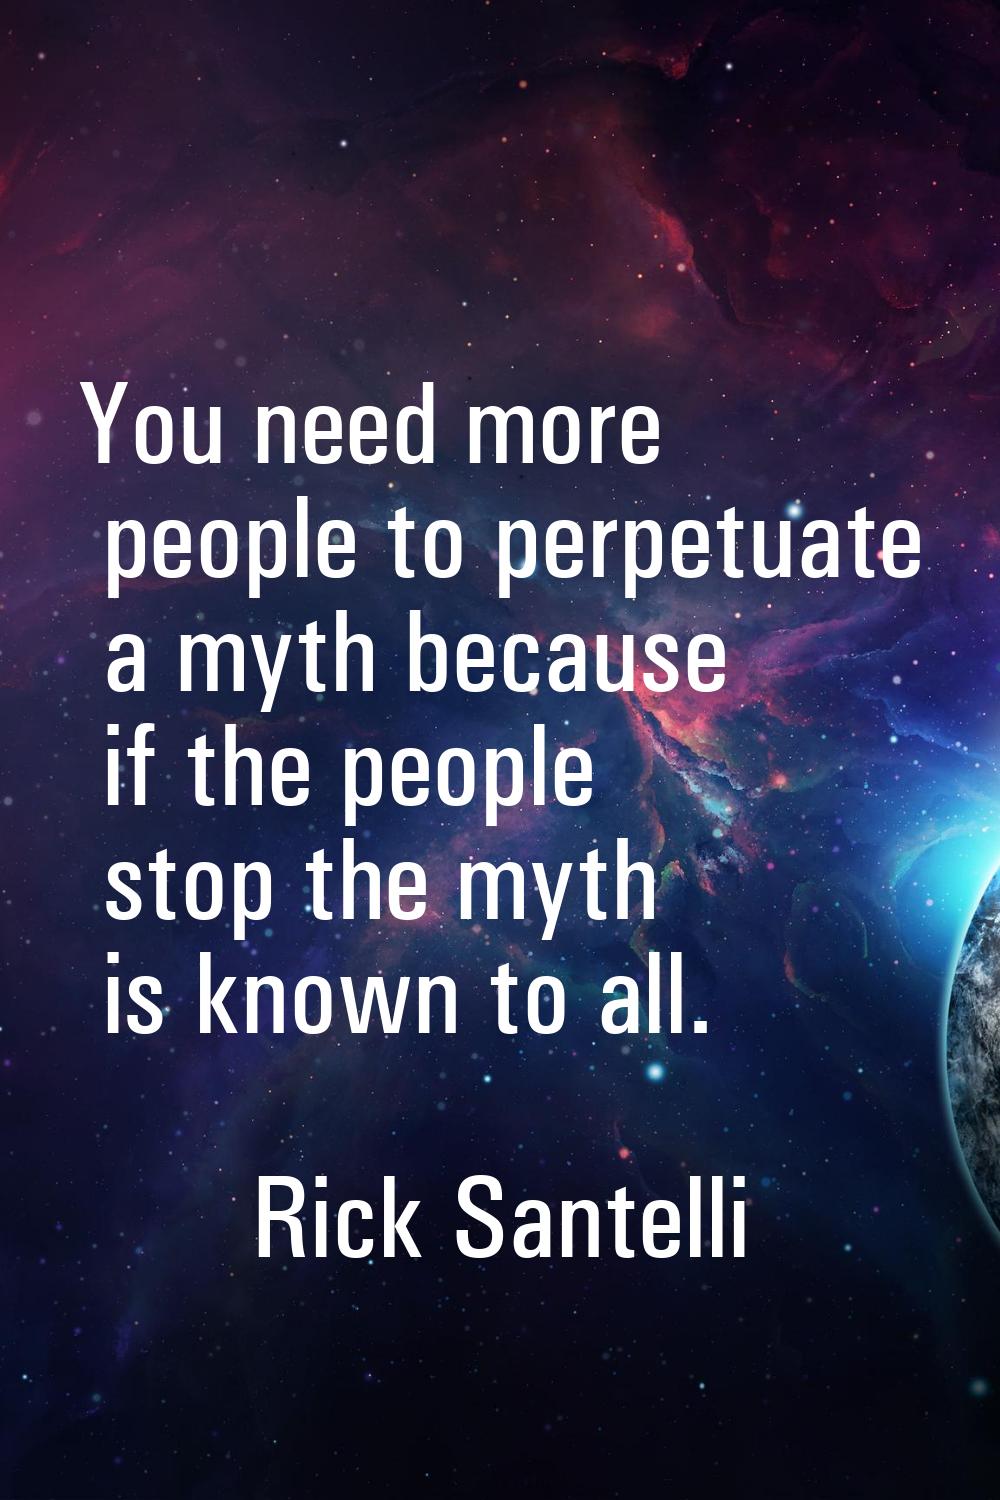 You need more people to perpetuate a myth because if the people stop the myth is known to all.